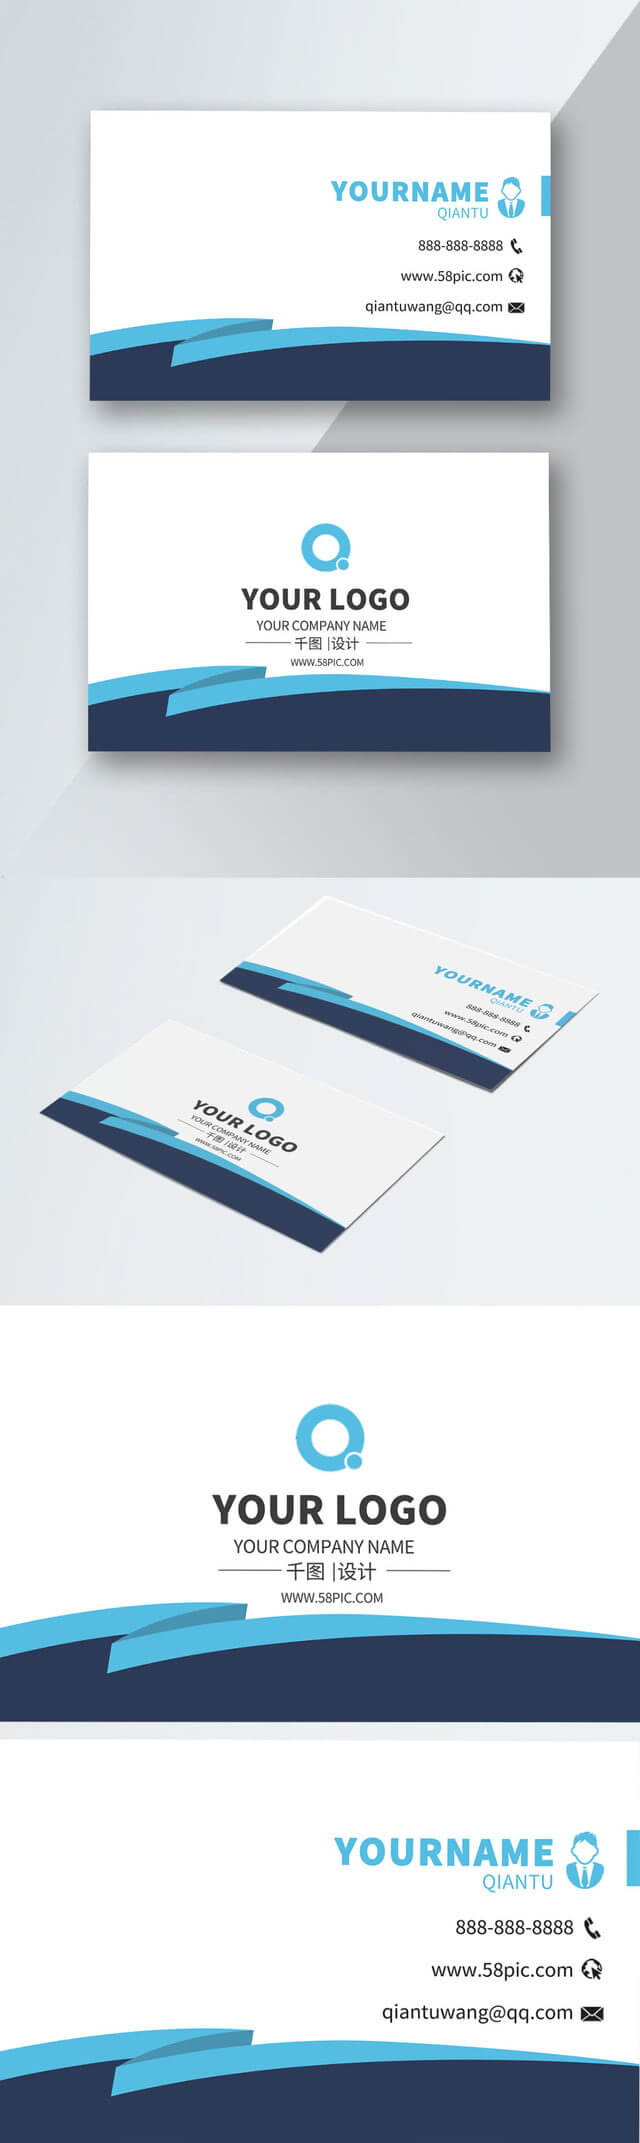 Advertising Company Business Card Material Download Regarding Visiting Card Templates Download